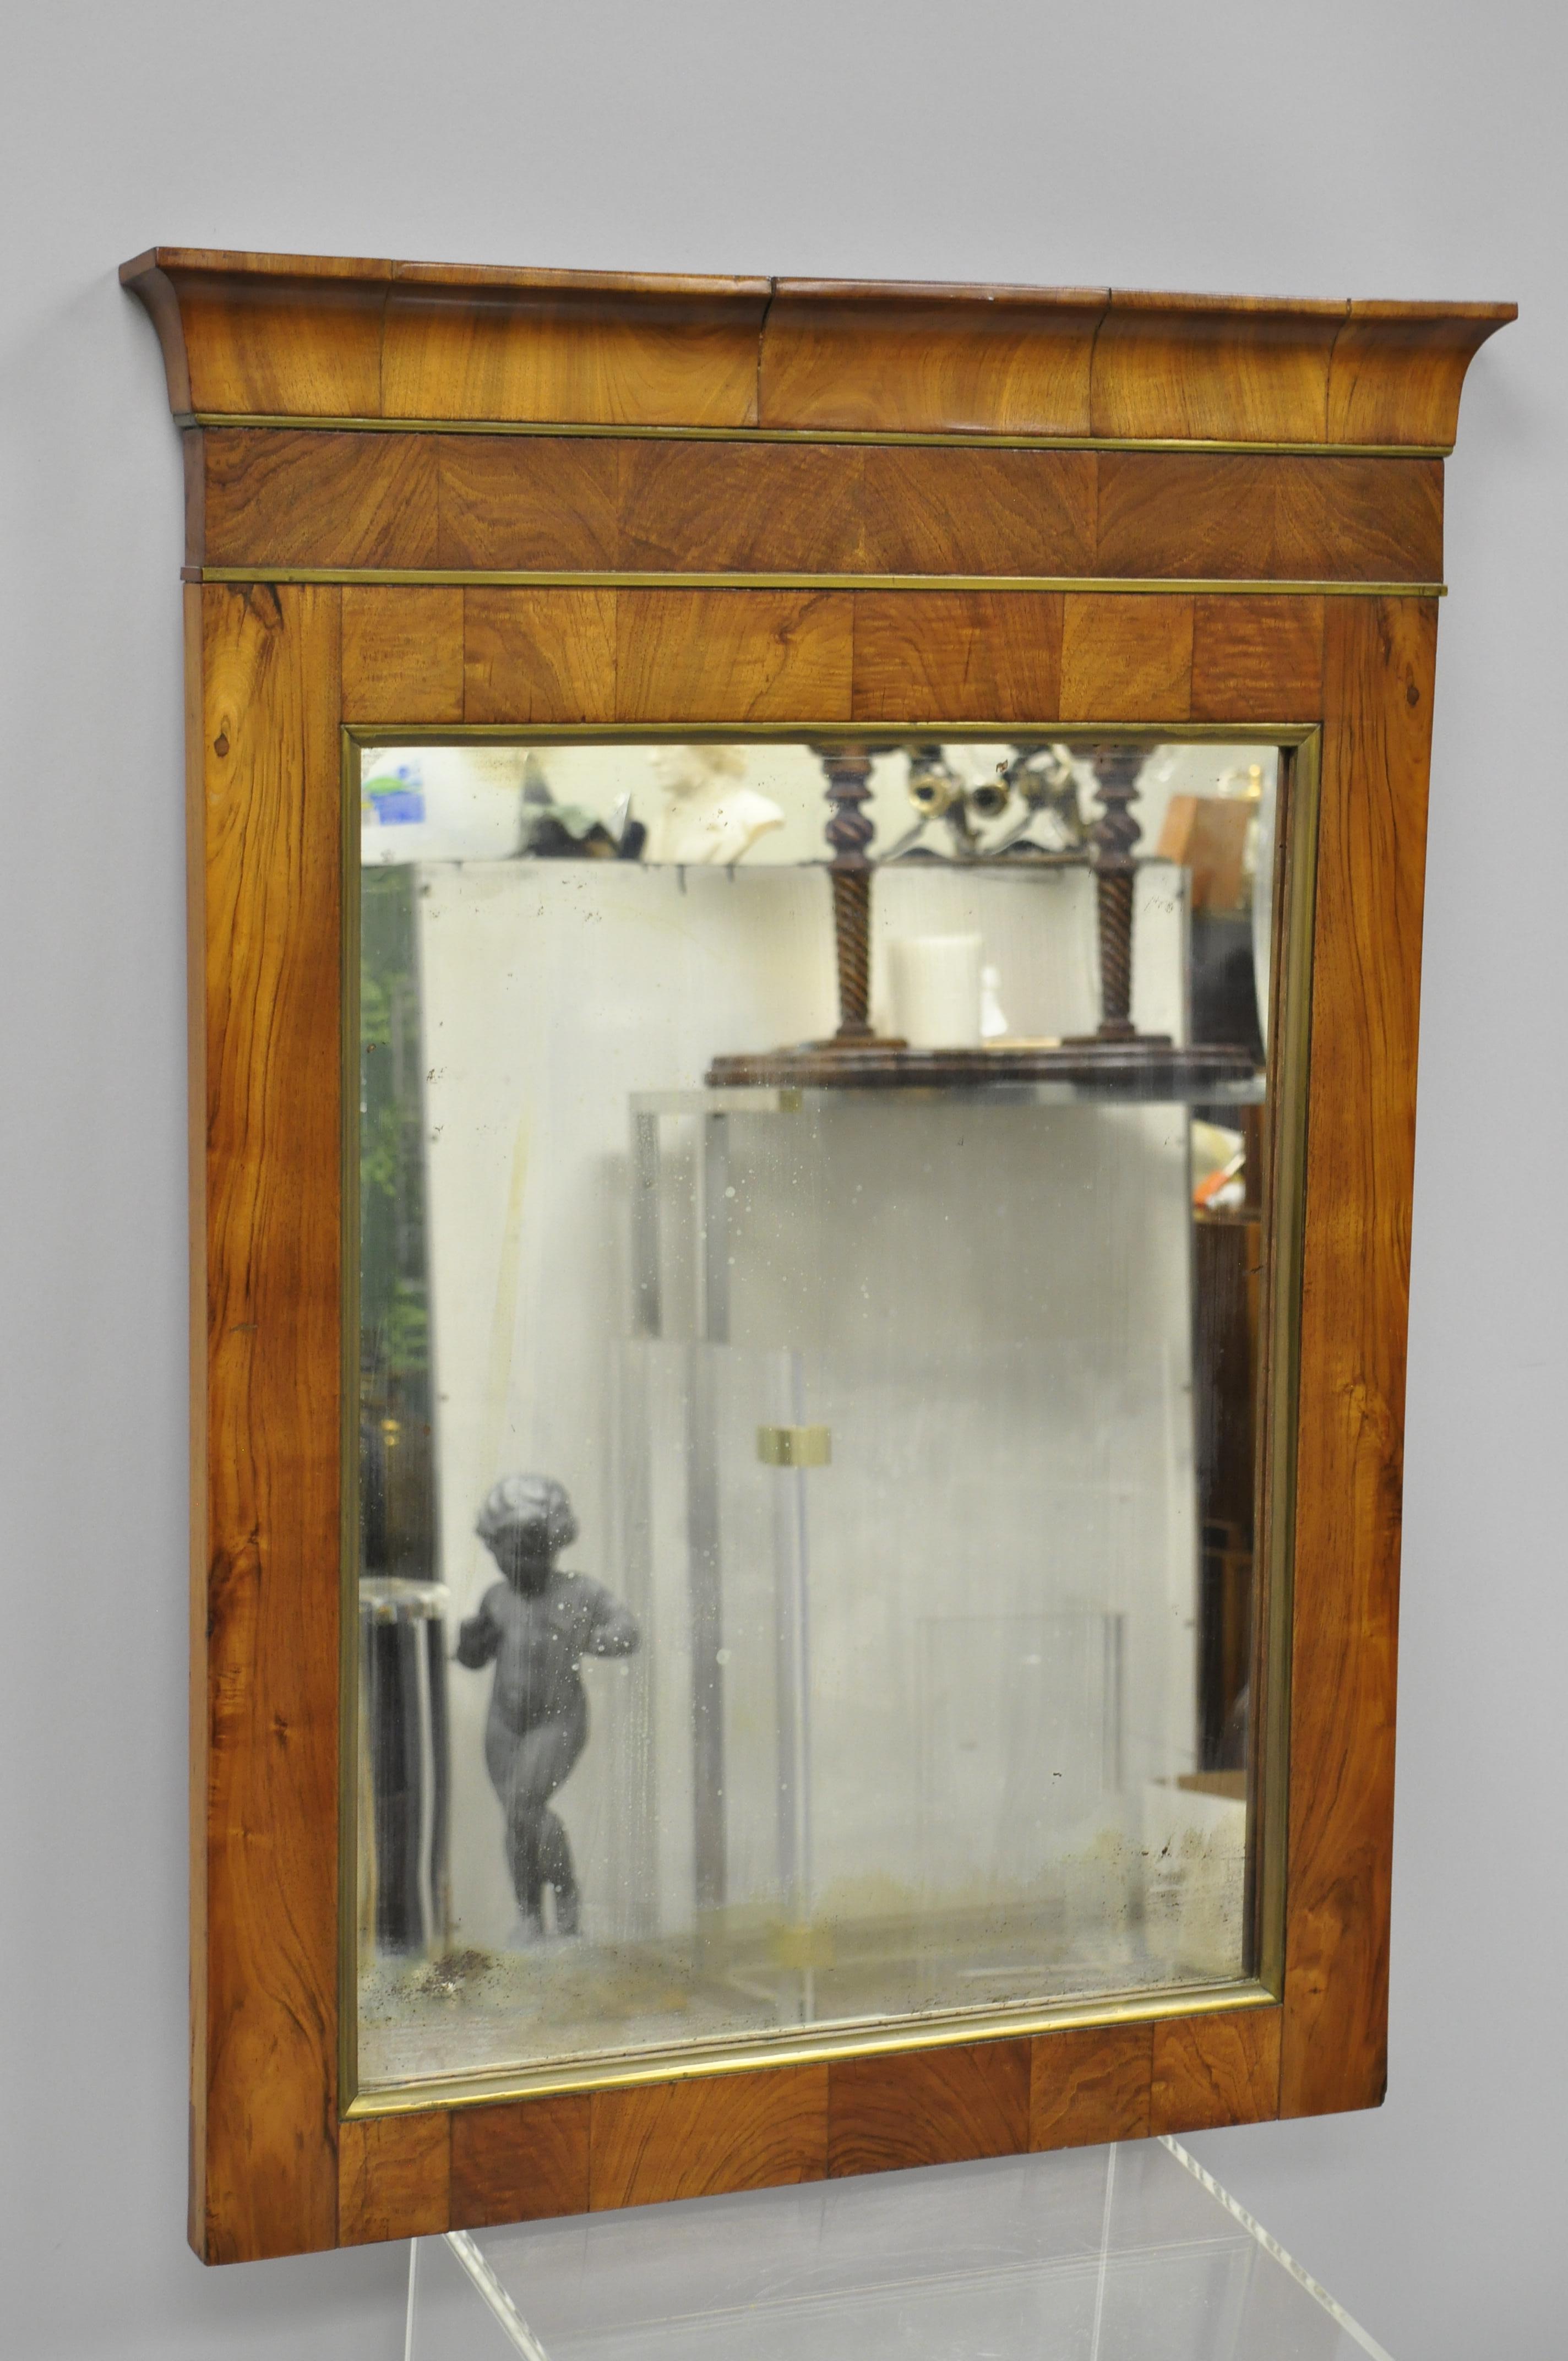 19th century American Empire crotch mahogany looking glass wall mirror with brass trim. Item features brass trim to crest and mirror border, and stunning crotch mahogany wood grain with 